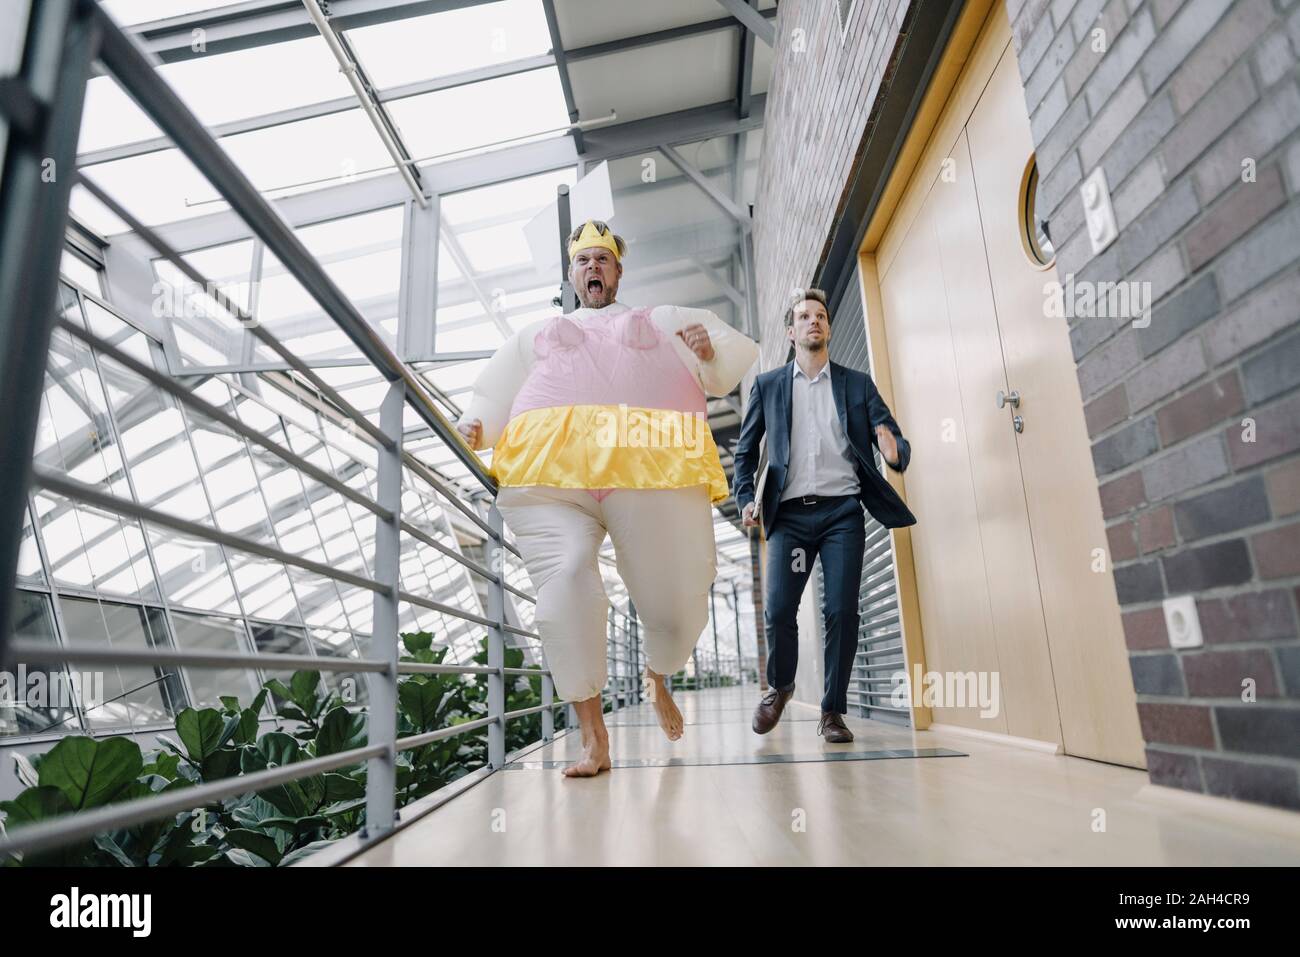 Businessman and man dressed up as a ballerina running in modern office building Stock Photo